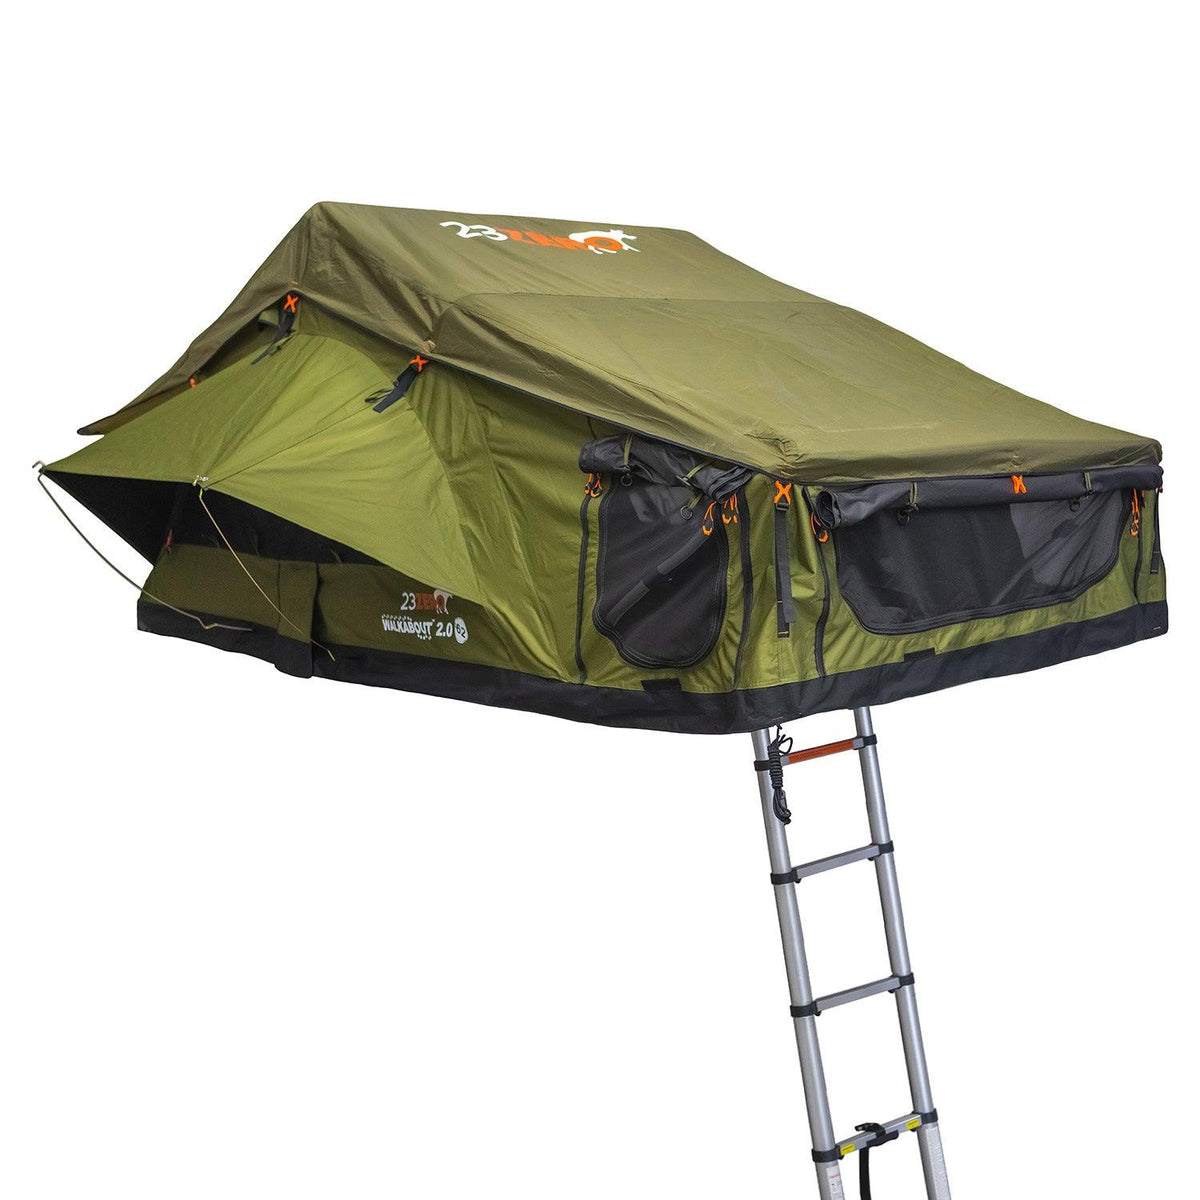 Roof Top Tent WINTER CAMPING insulation liner review and installation,  23ZERO Walkabout 62 